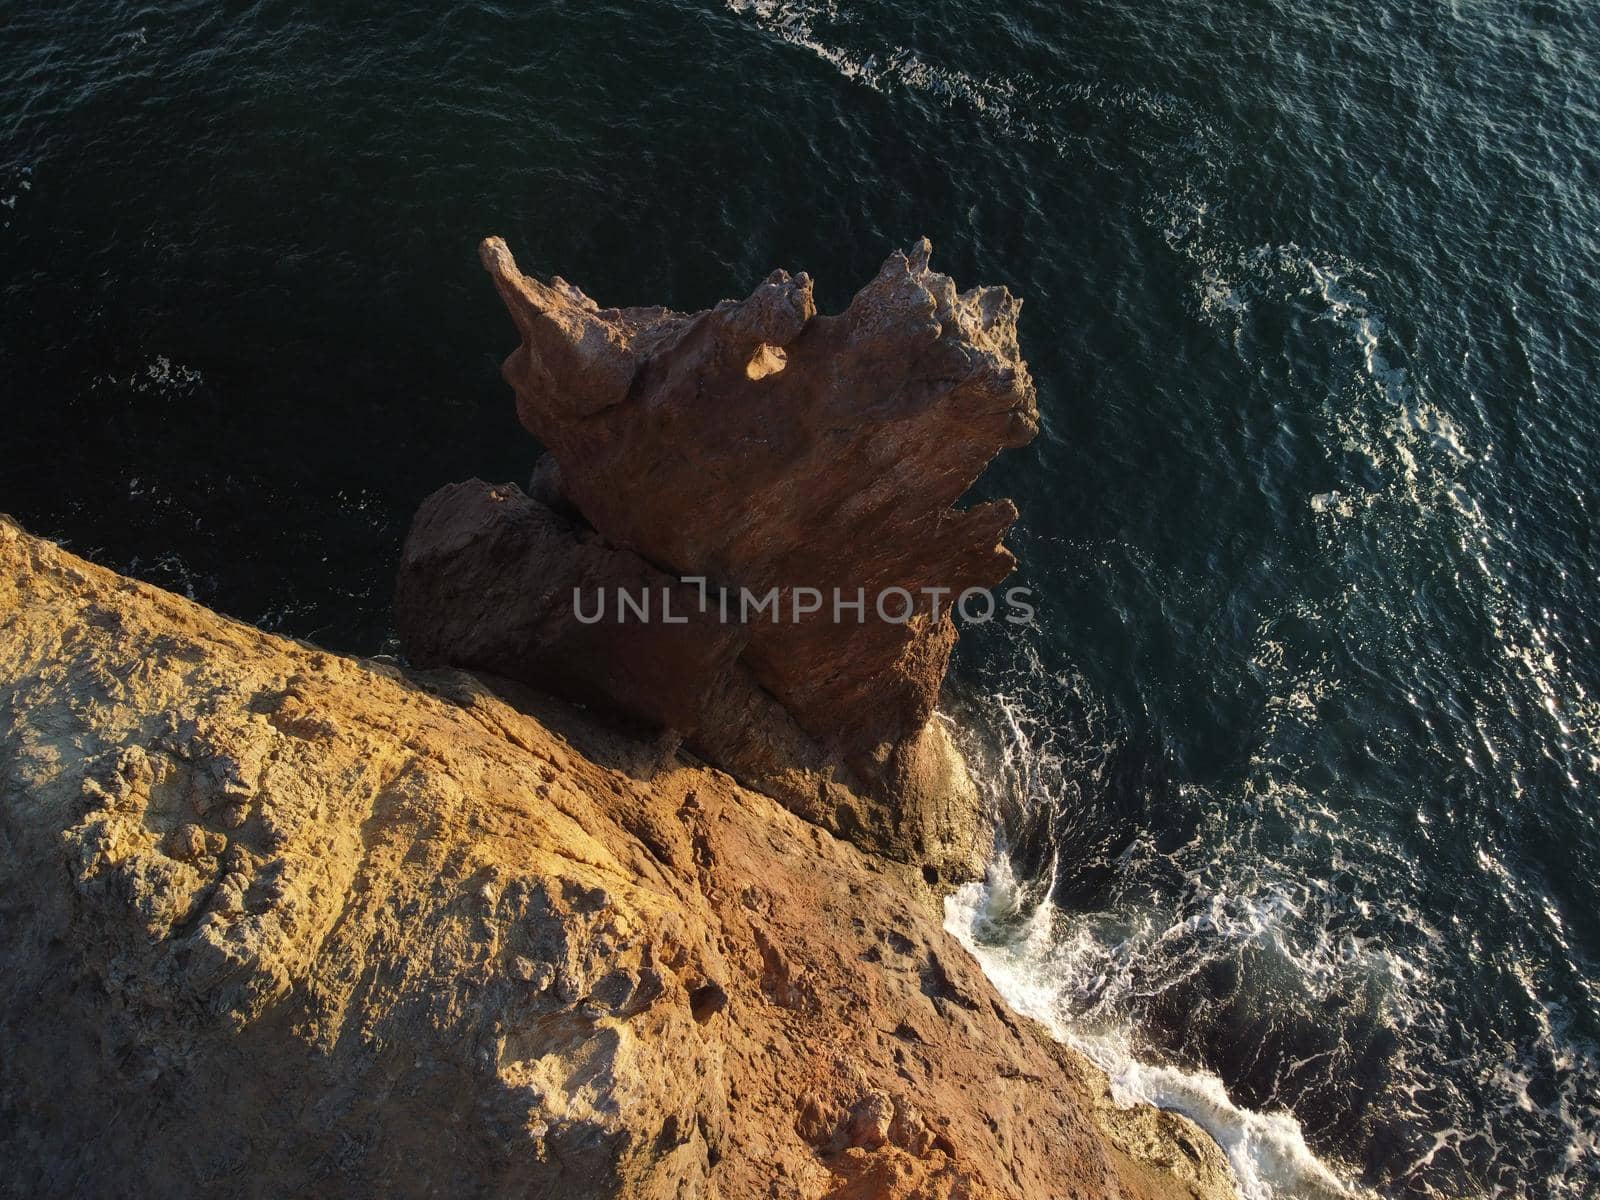 The rock or lava formation with the shape of a large animal or dragon head arise from the water. Popular travel destination volcanic rock formation in the shape of a dragon's head. Crimea, Fiolent